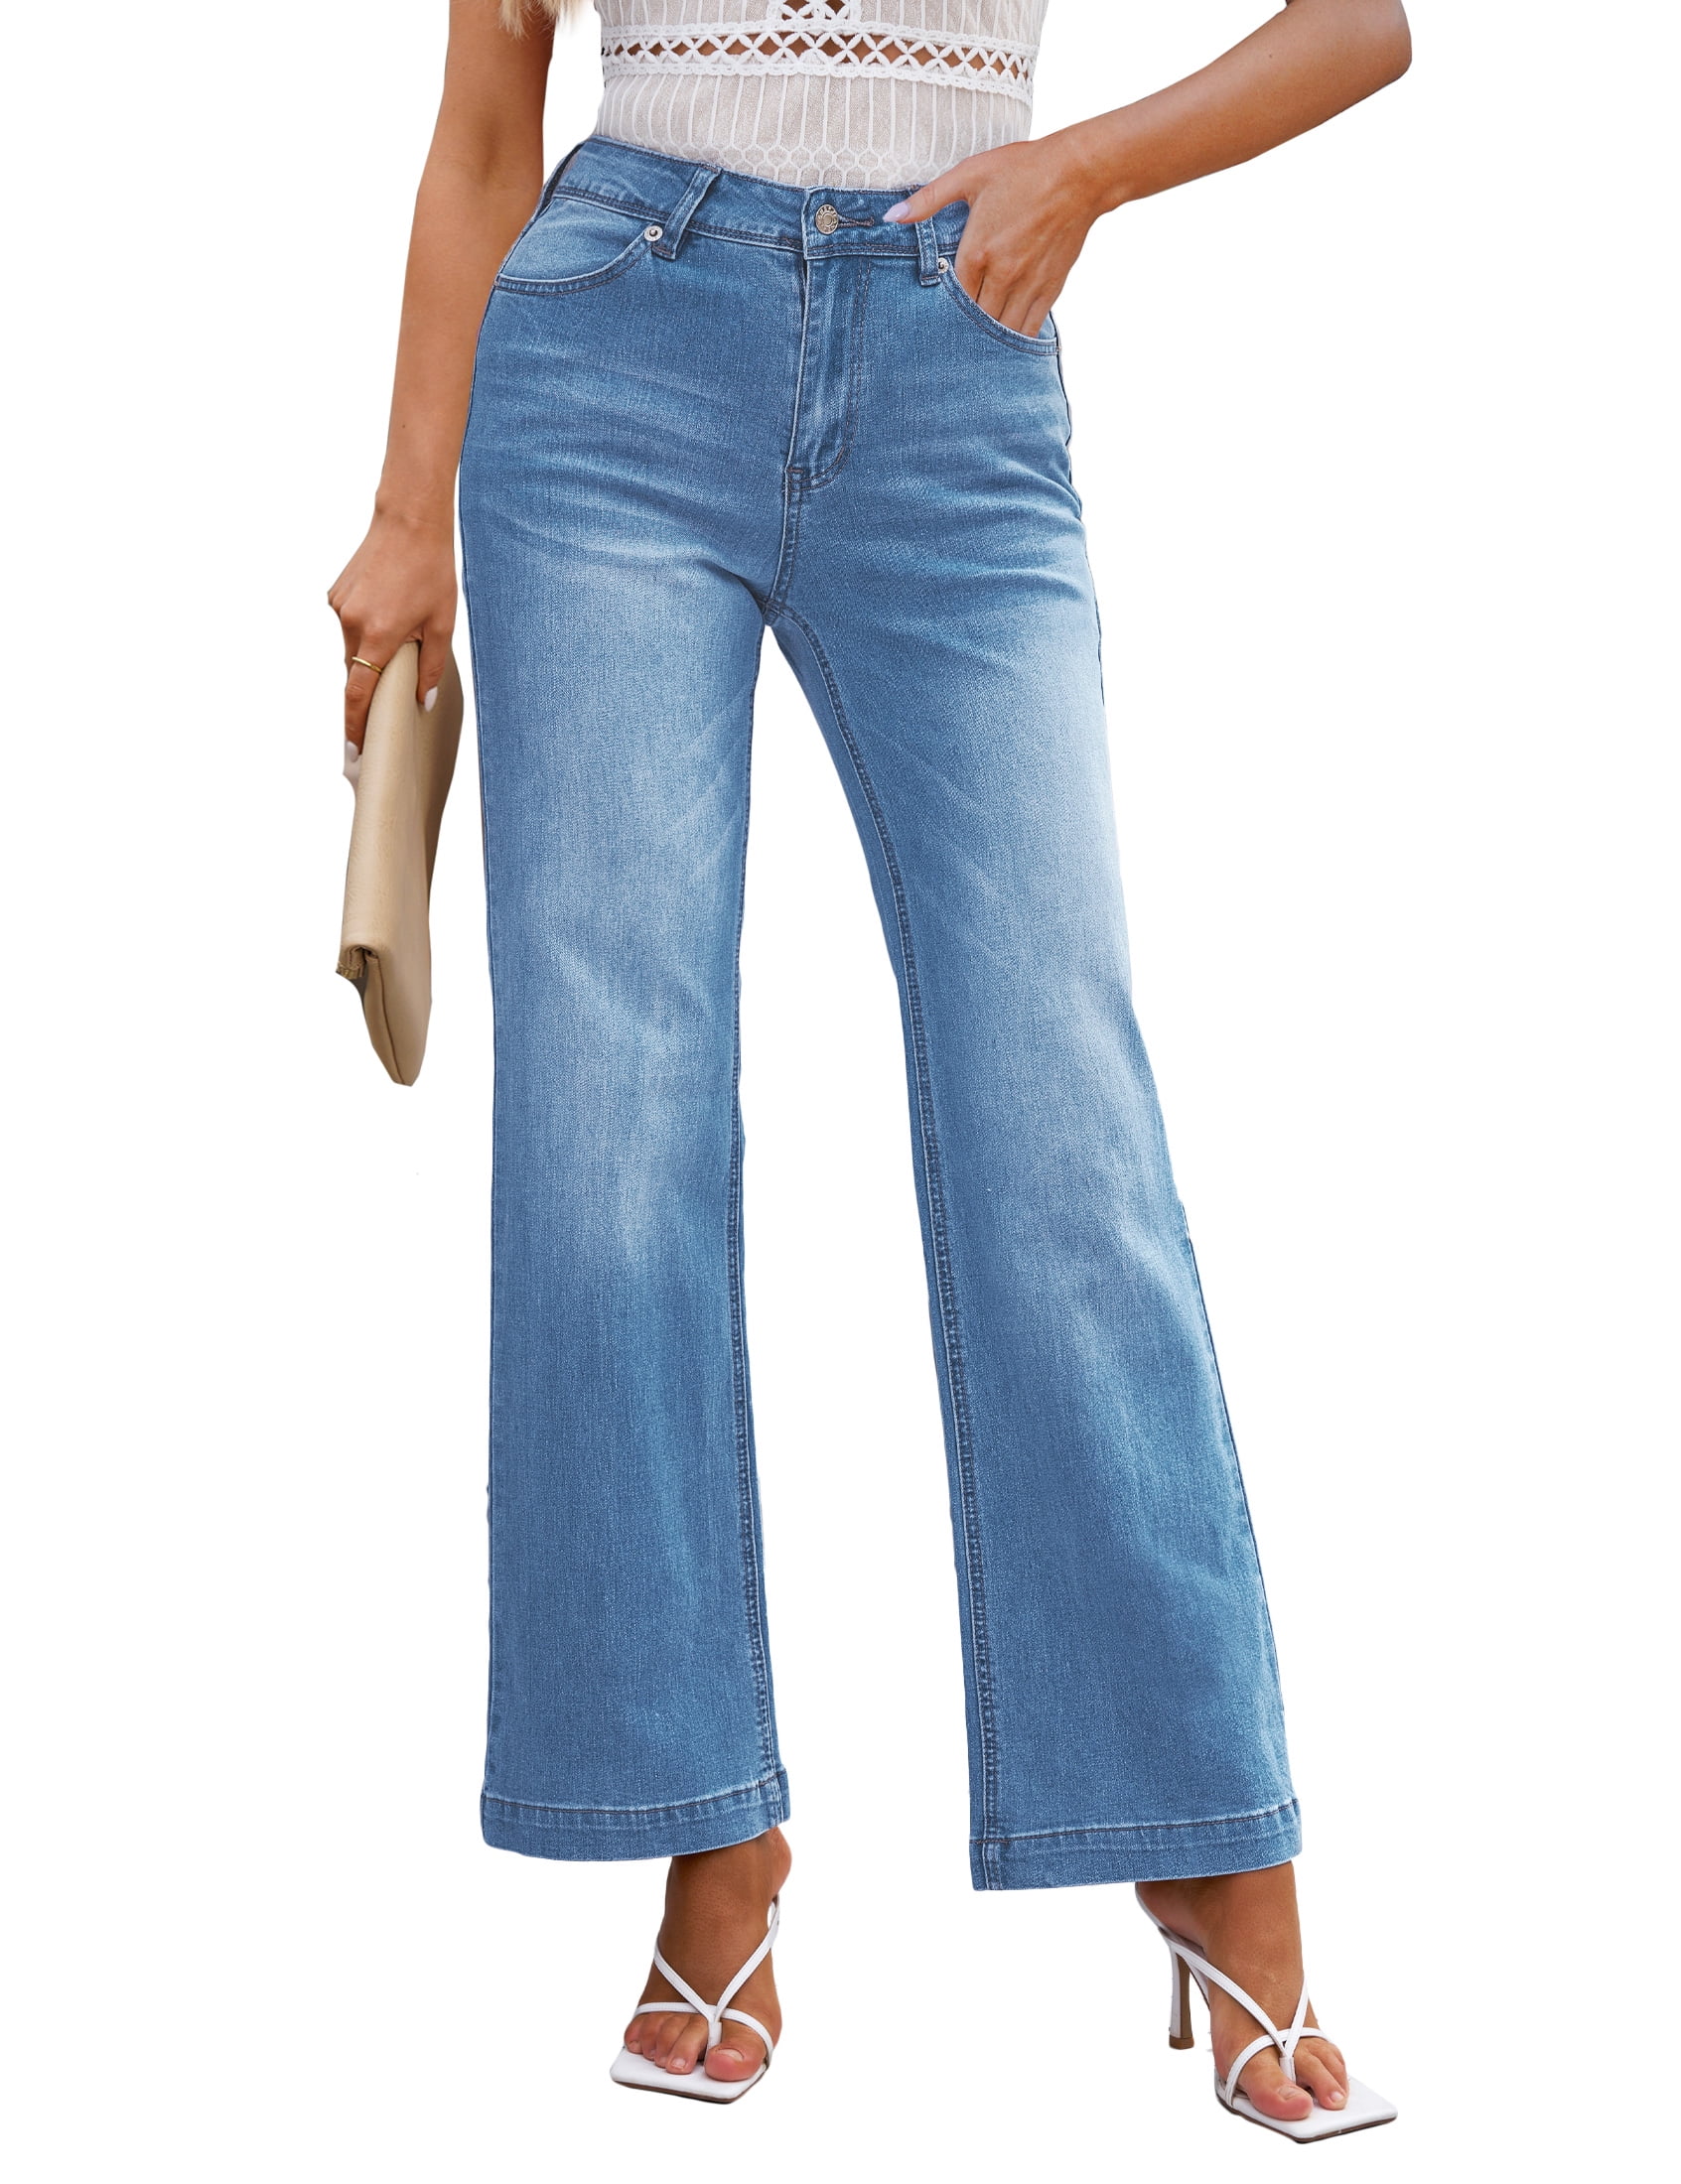 Vetinee High Waisted Wide Leg Jeans for Women Casual Summer